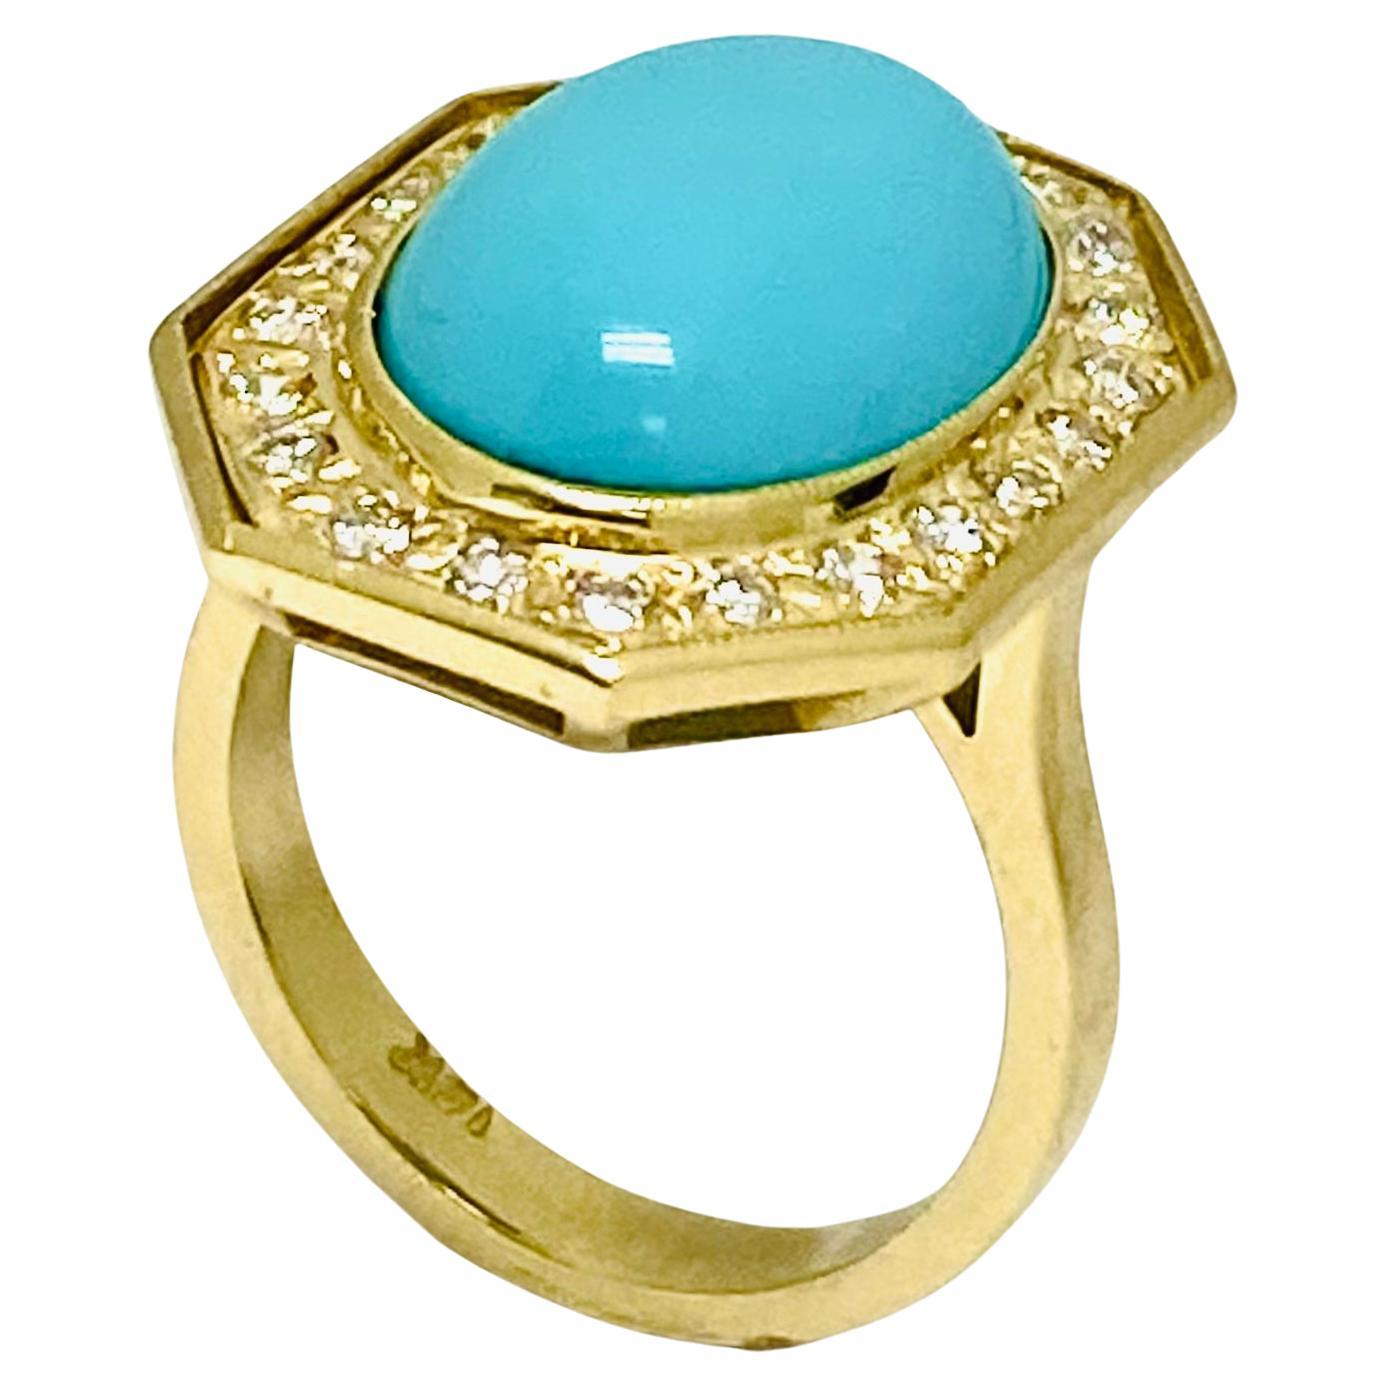 Women's Vintage Turquoise Ring 14k Gold Octagon Shape For Sale